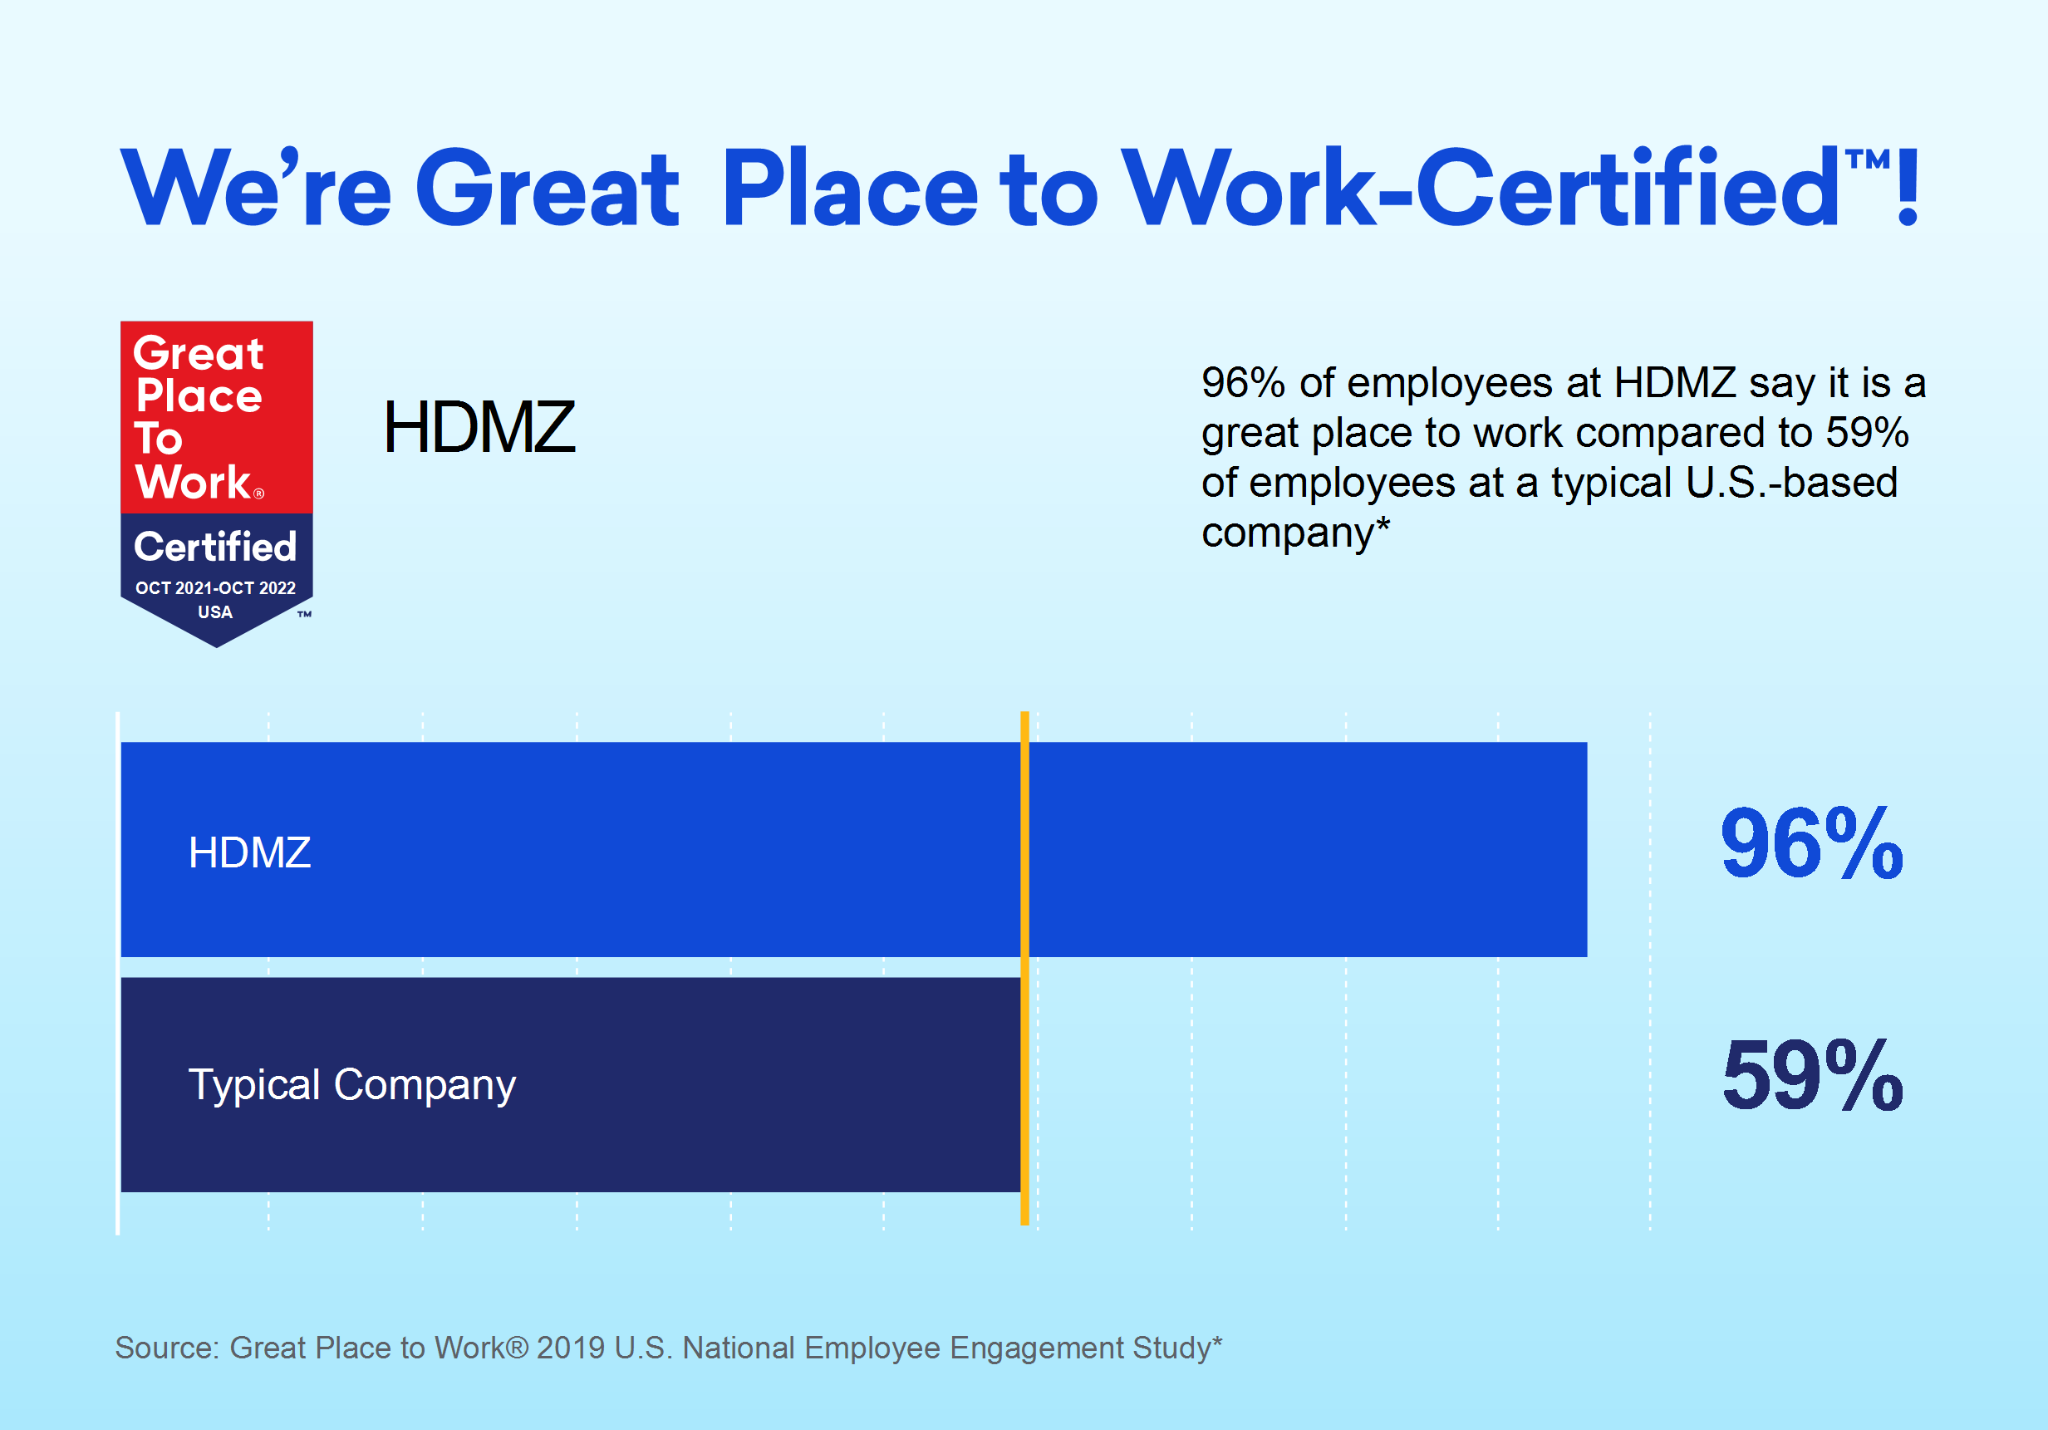 HDMZ is Great Place to Work Certified